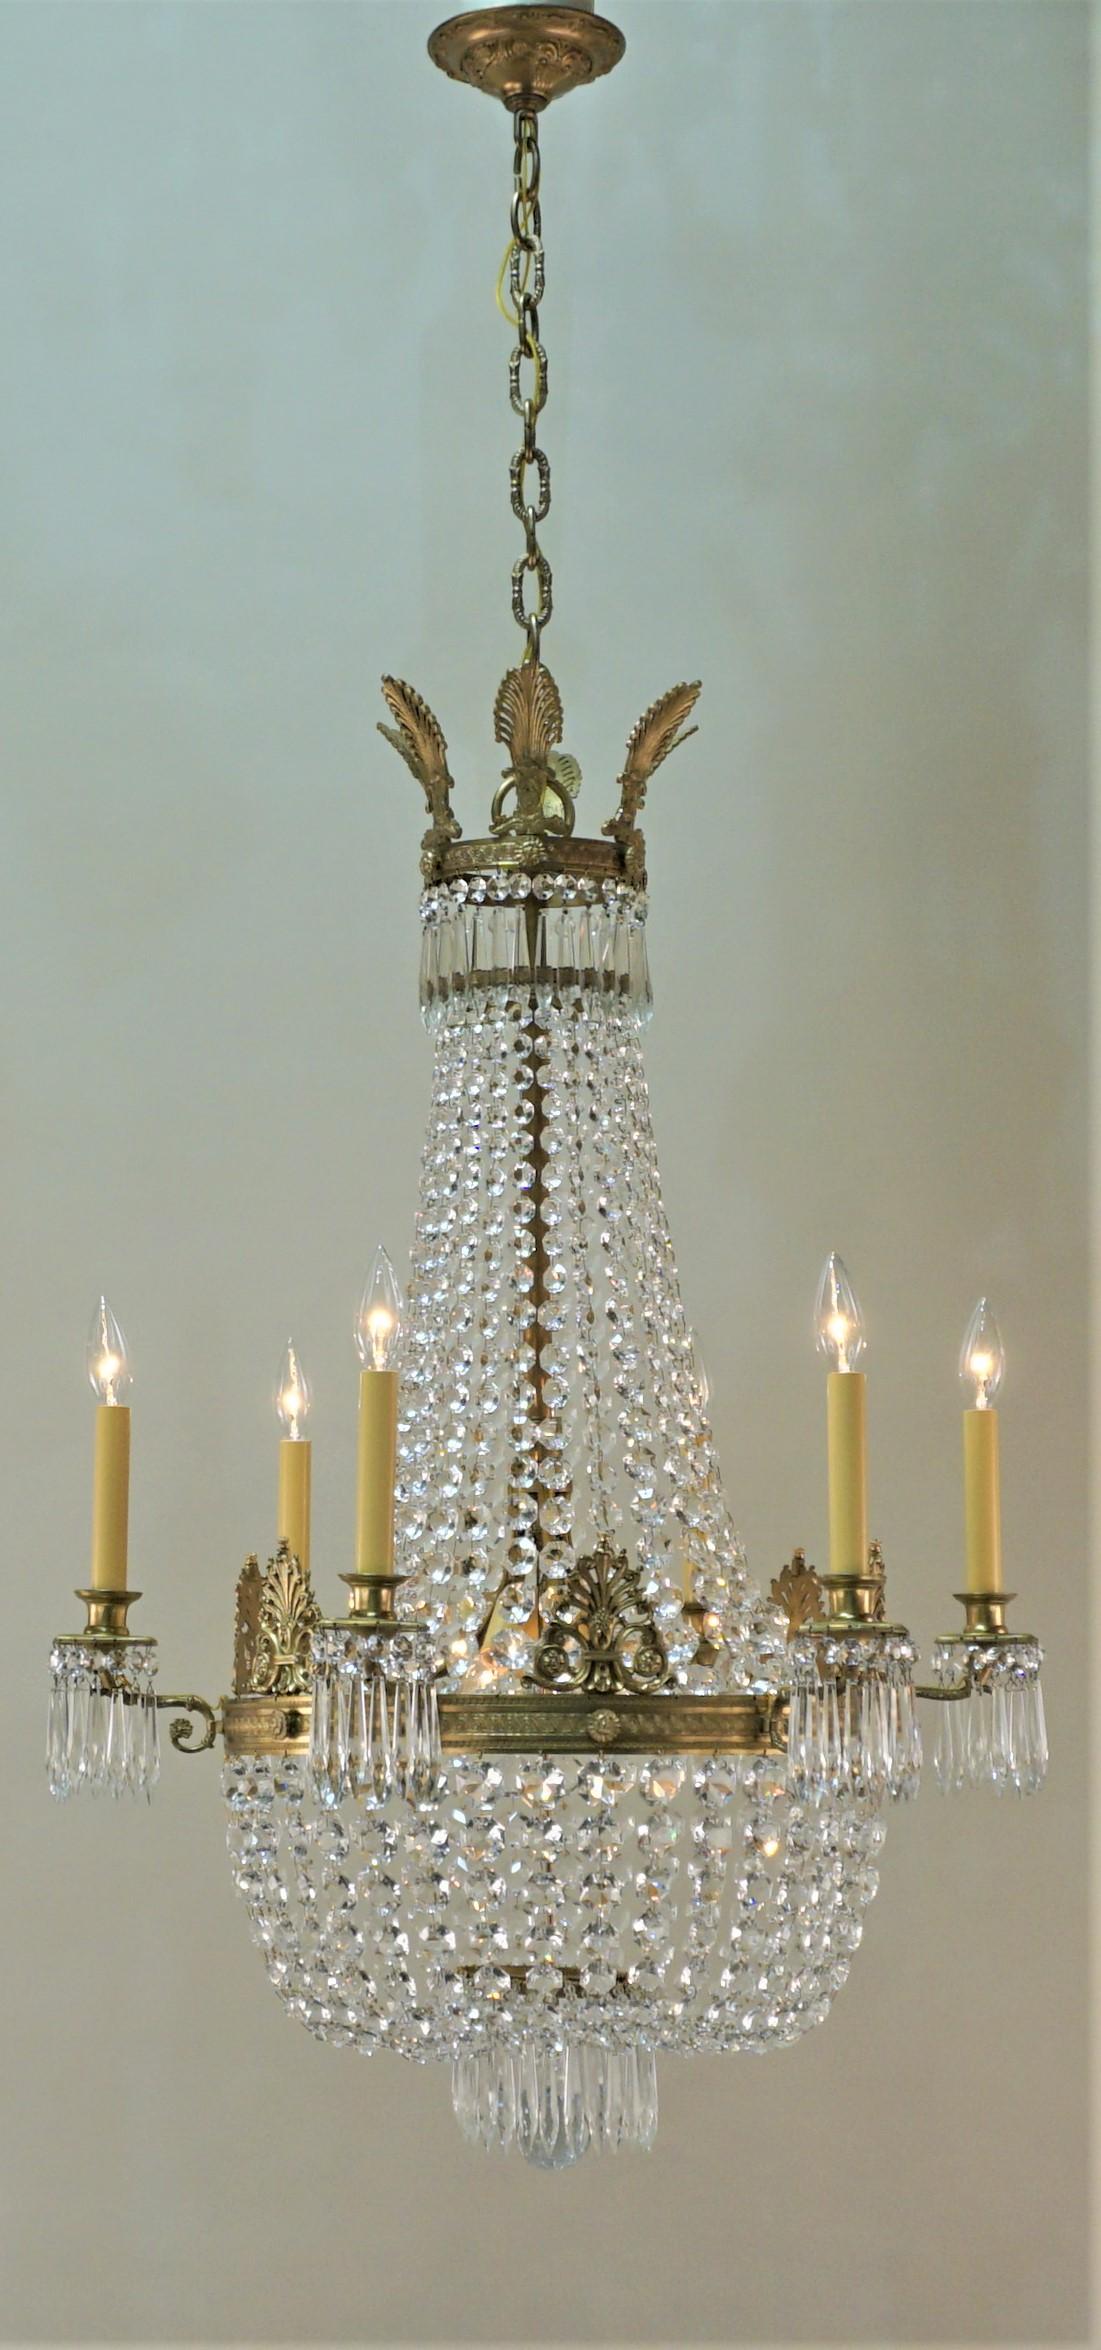 French Empire style chandelier with beautiful detail crafted bronze and hand polished crystal.
Total of 9-light 60 watts max each
Measurement: 25